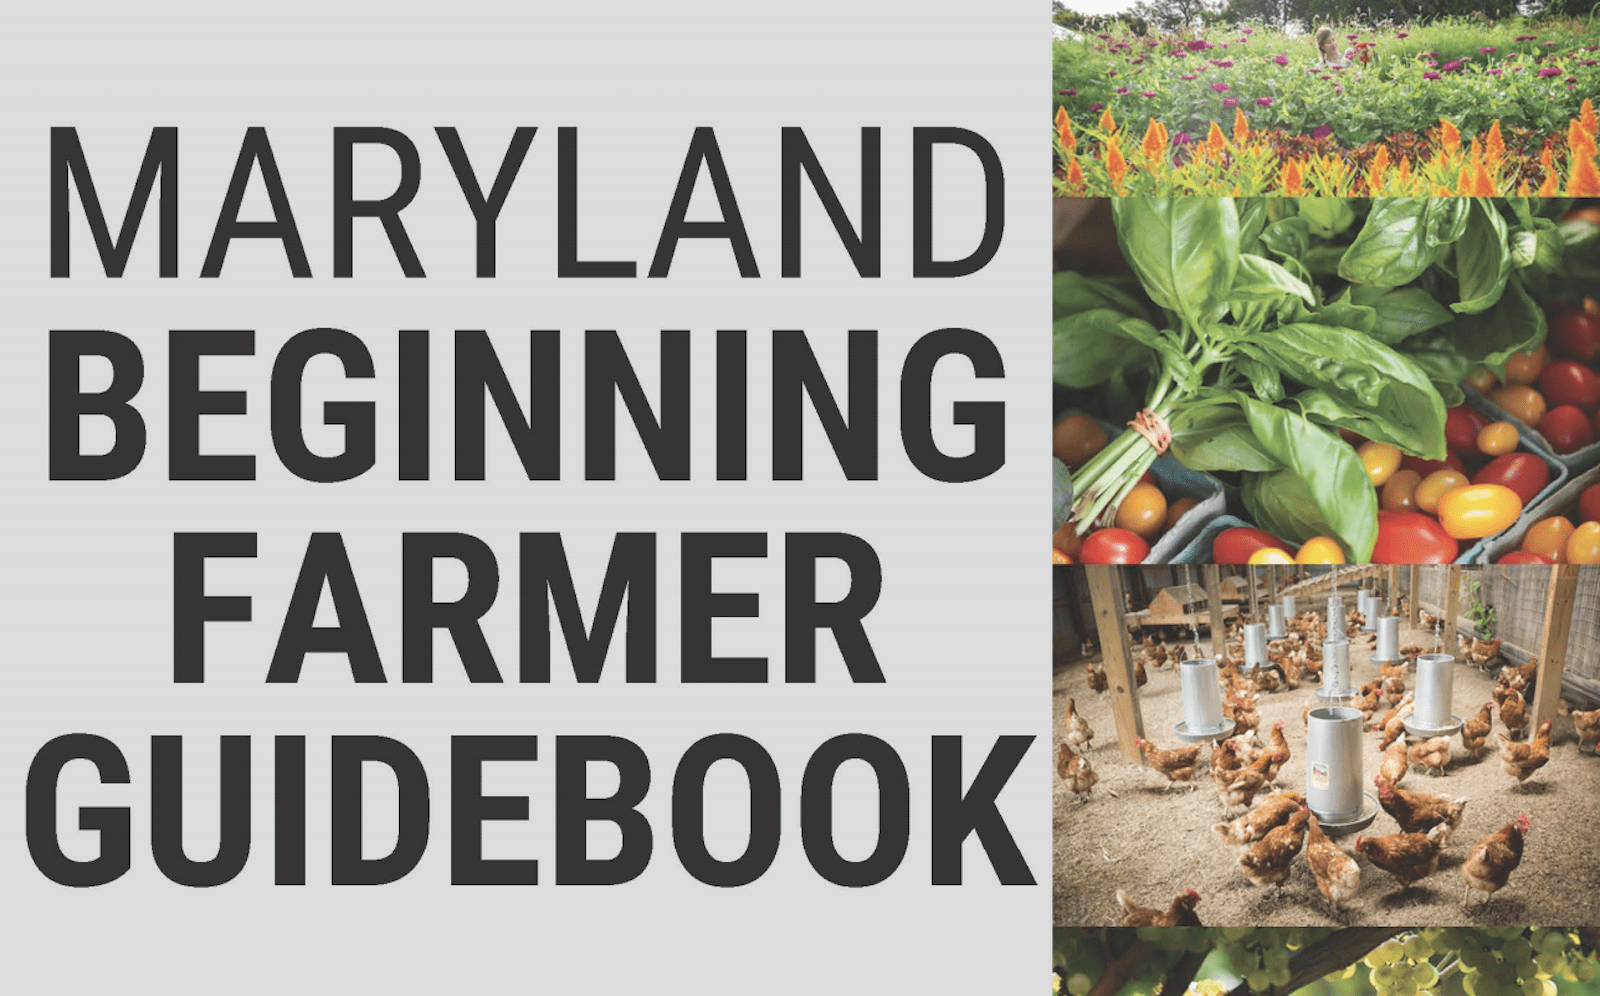 Maryland Beginning Farmer Guidebook text with pictures of cherry tomatoes, basil, chickens, and grapes